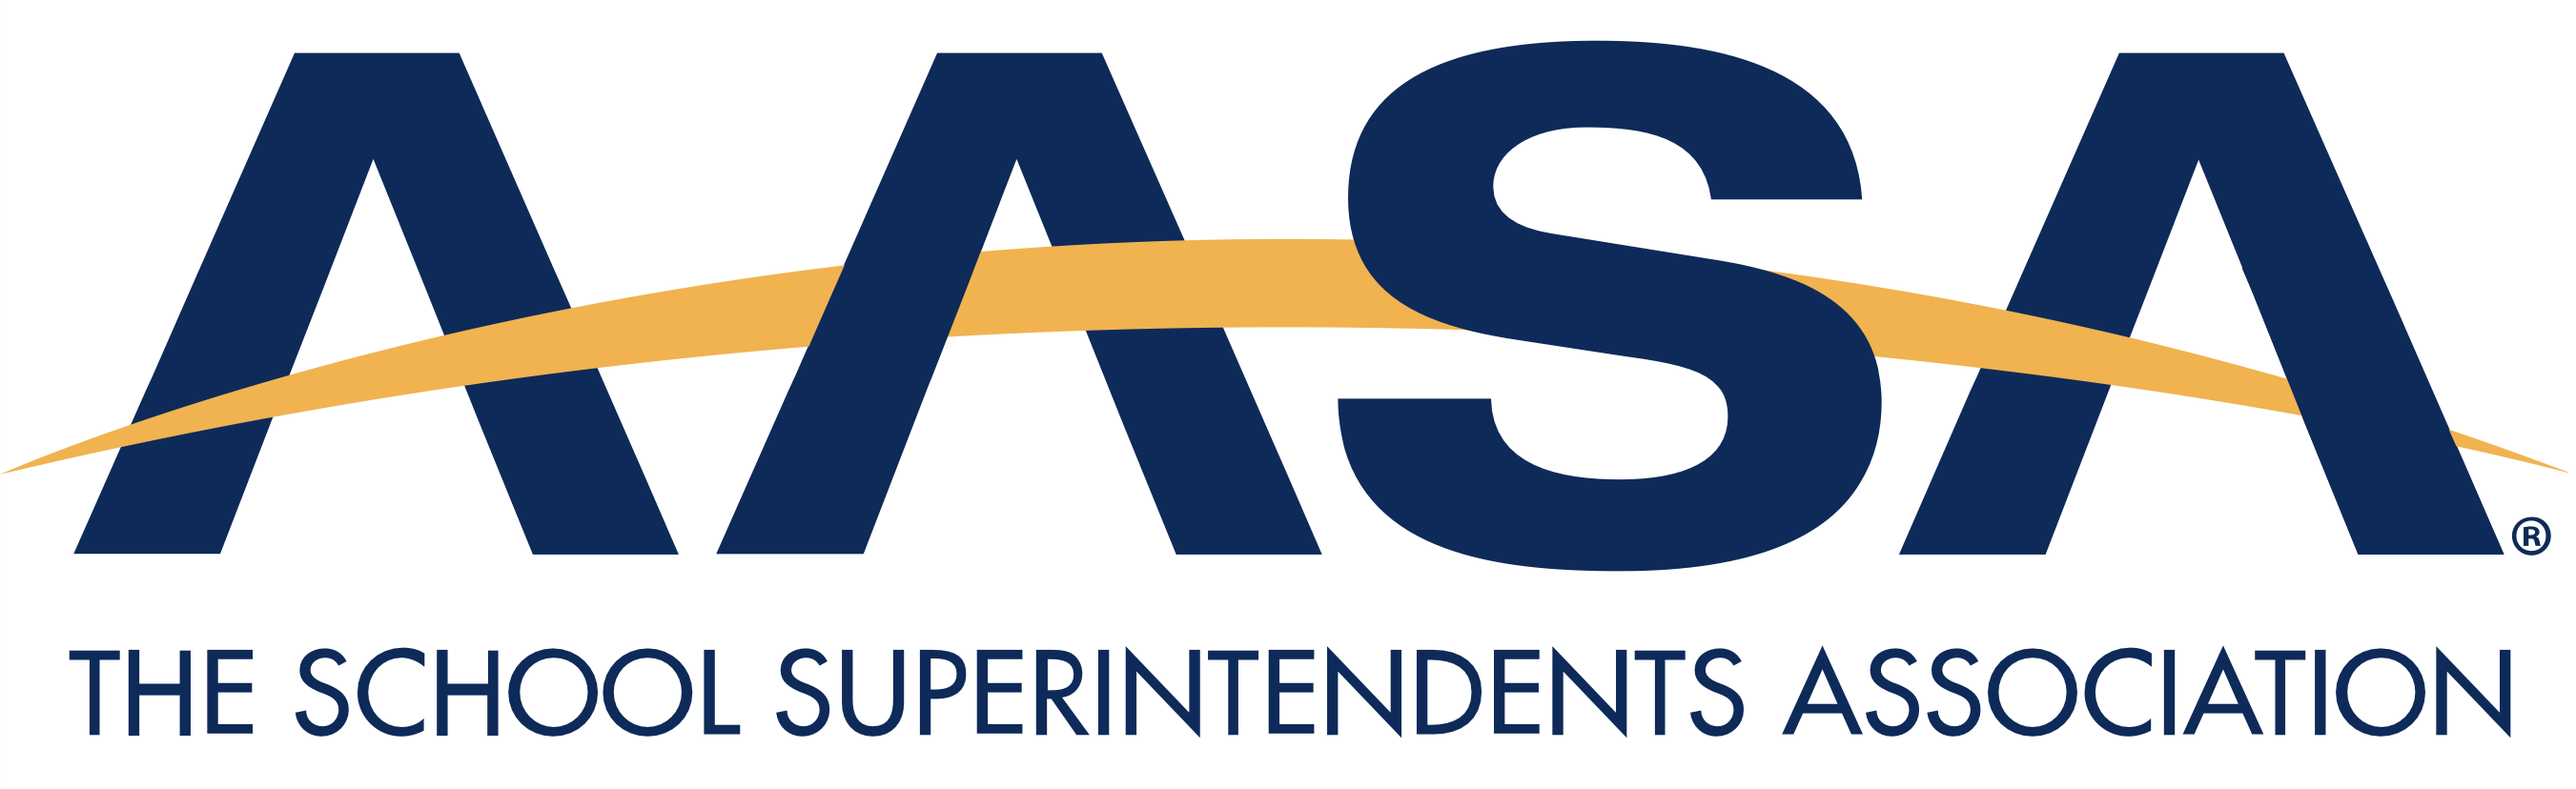 The logo for The School Superintendents Association.